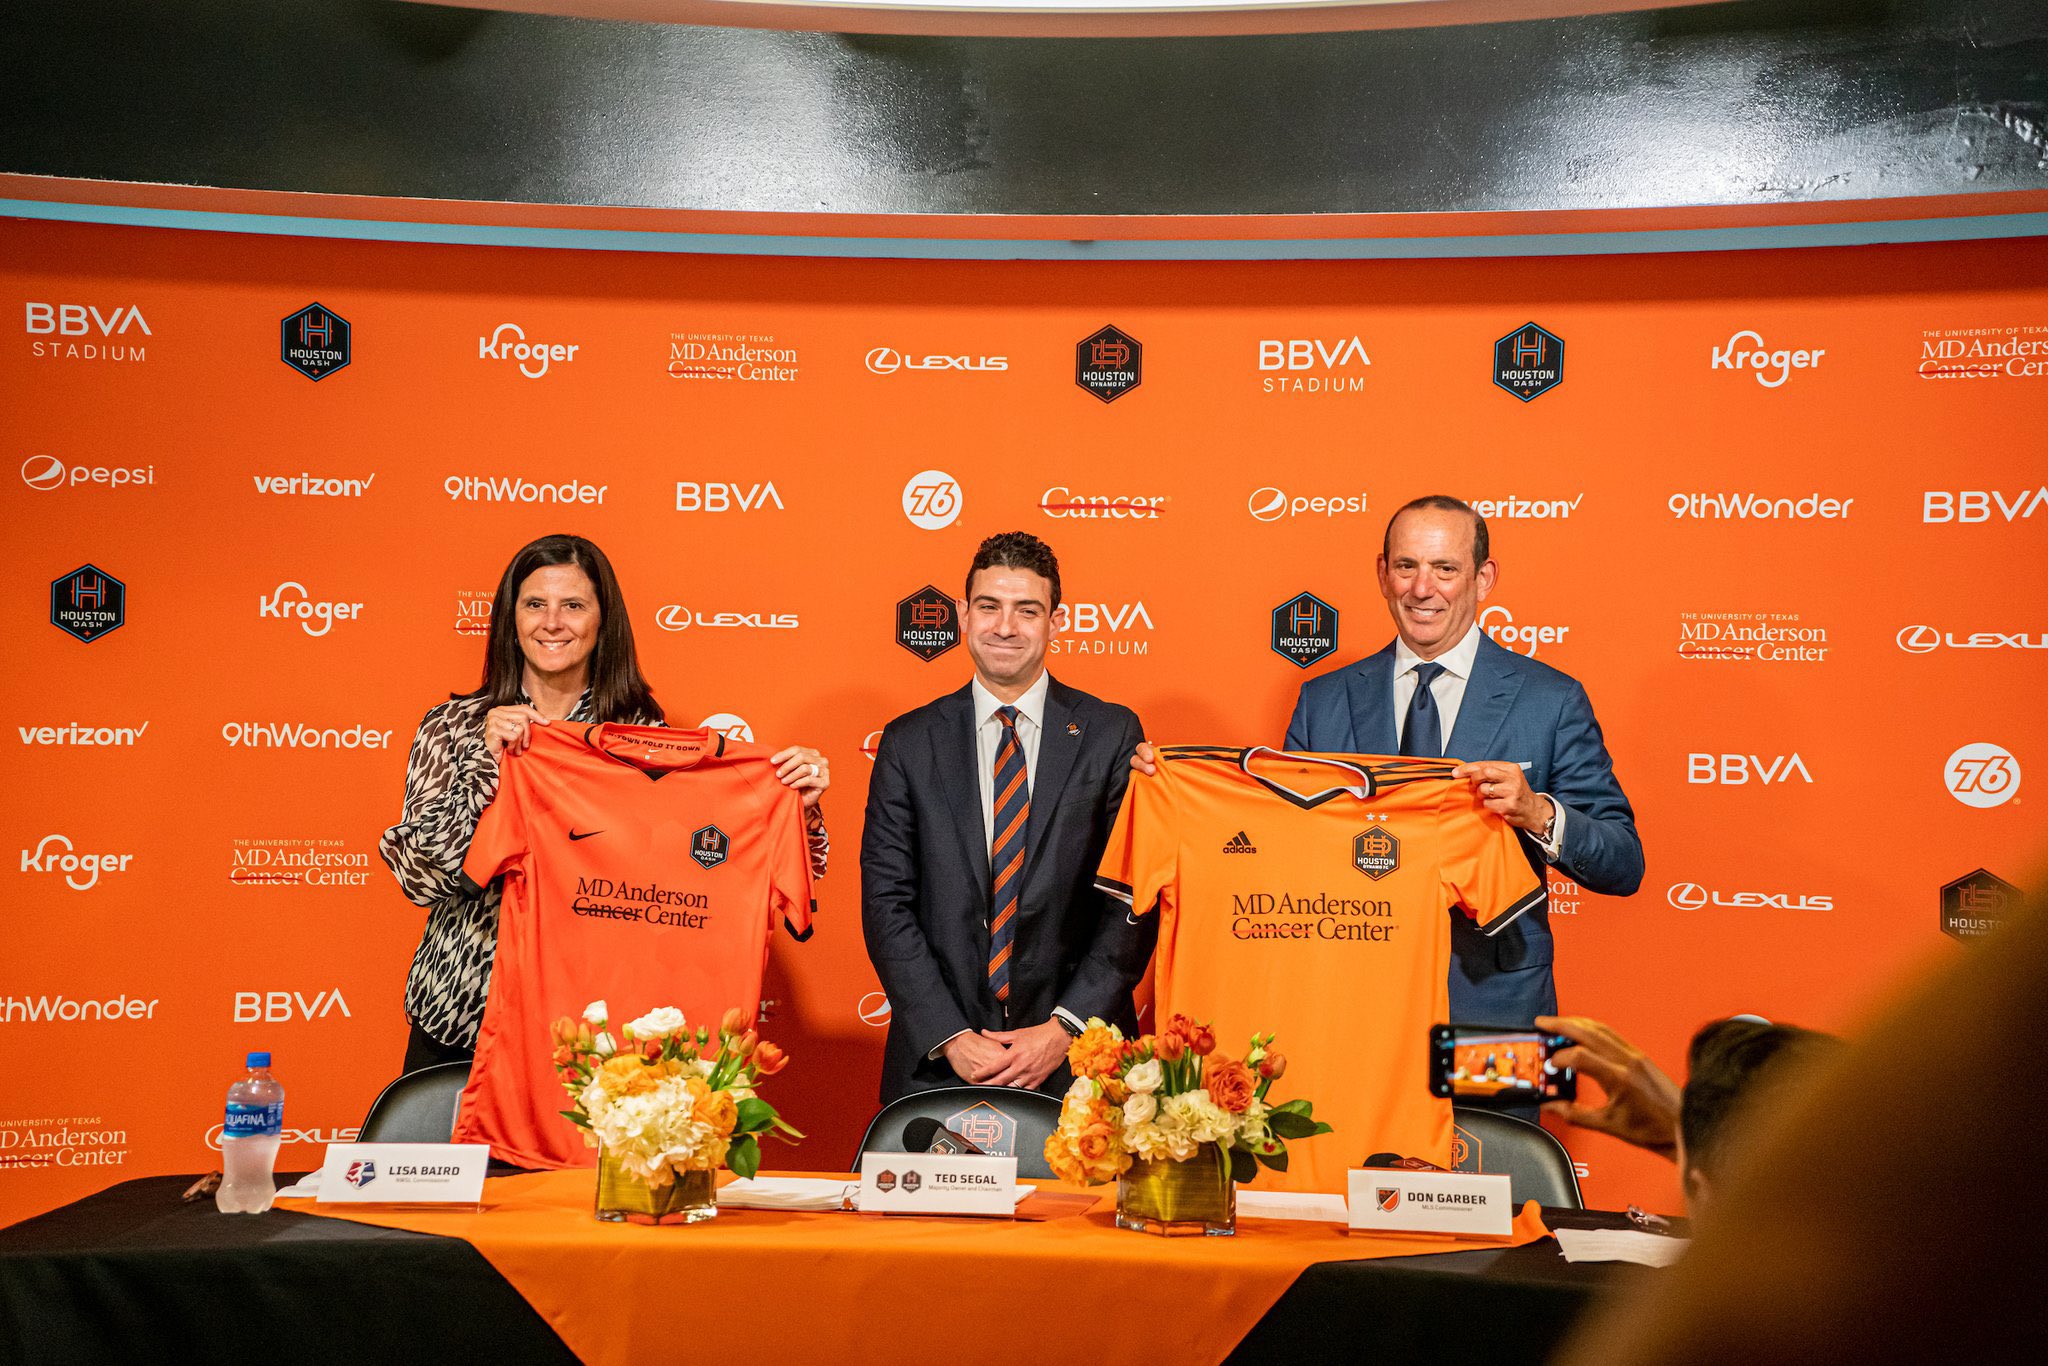 “Ready to get to work”: New Houston Dynamo FC owner Ted Segal hits the ground running